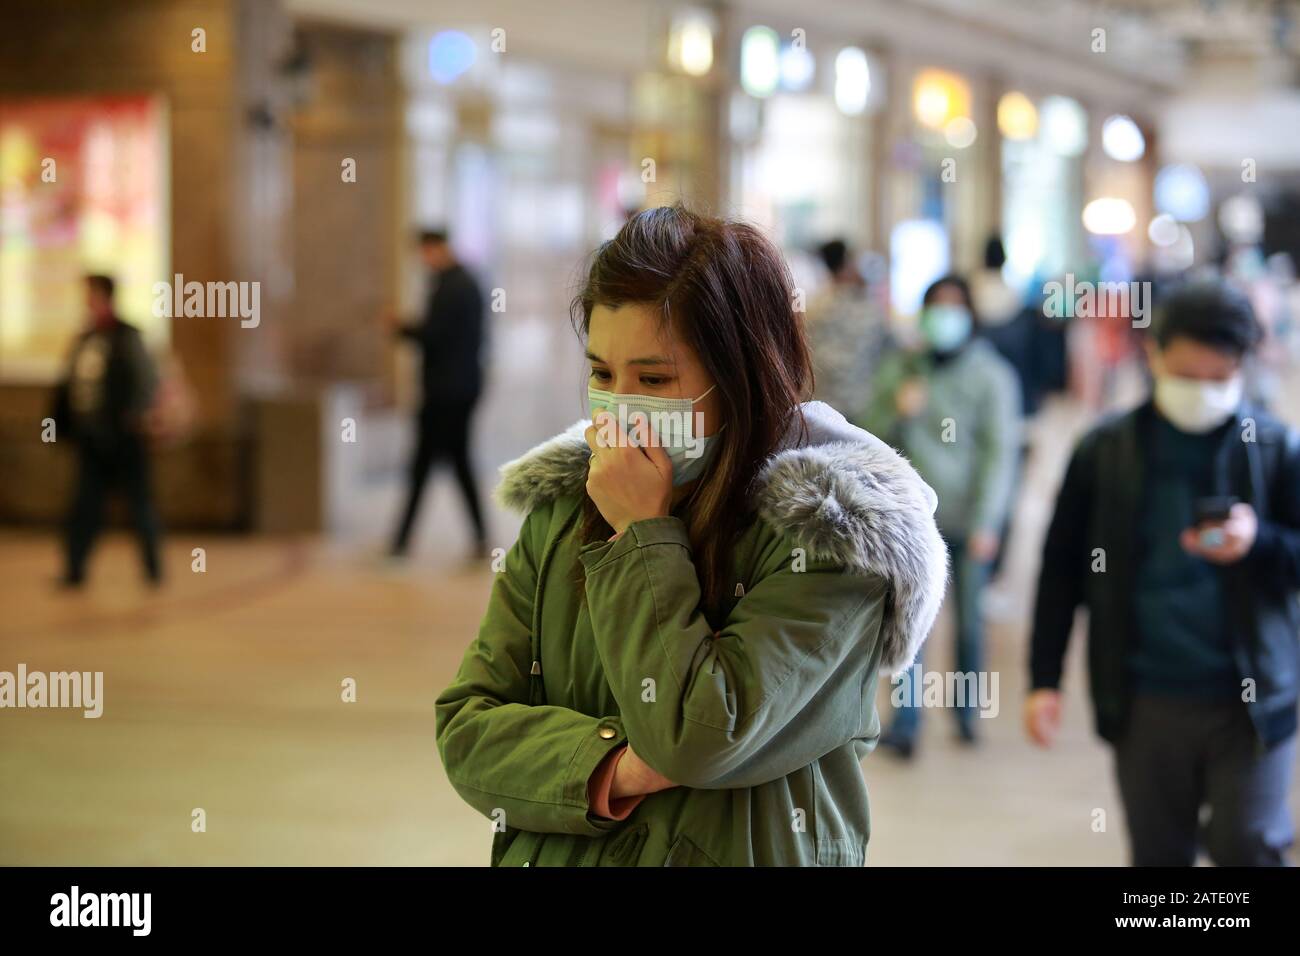 masked girl to protect herself from wuhan virus in public area Stock Photo